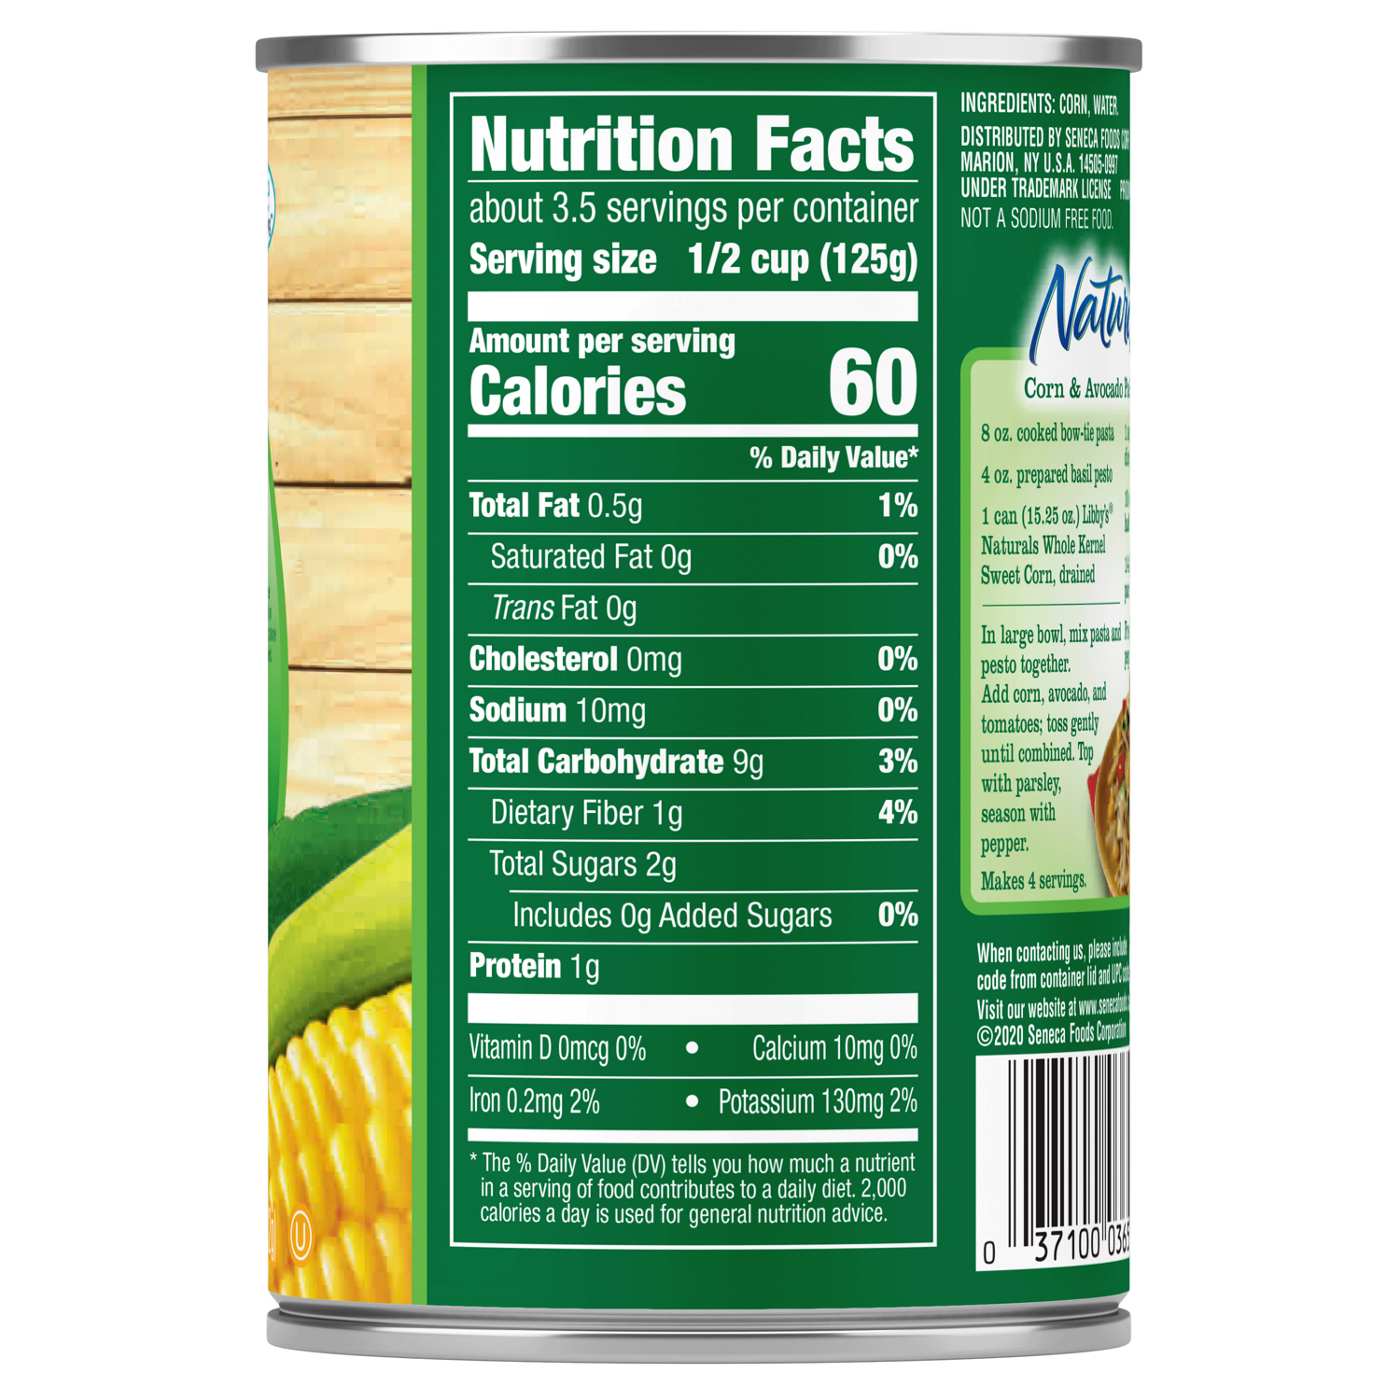 Libby's Naturals Whole Kernel Sweet Corn; image 2 of 4